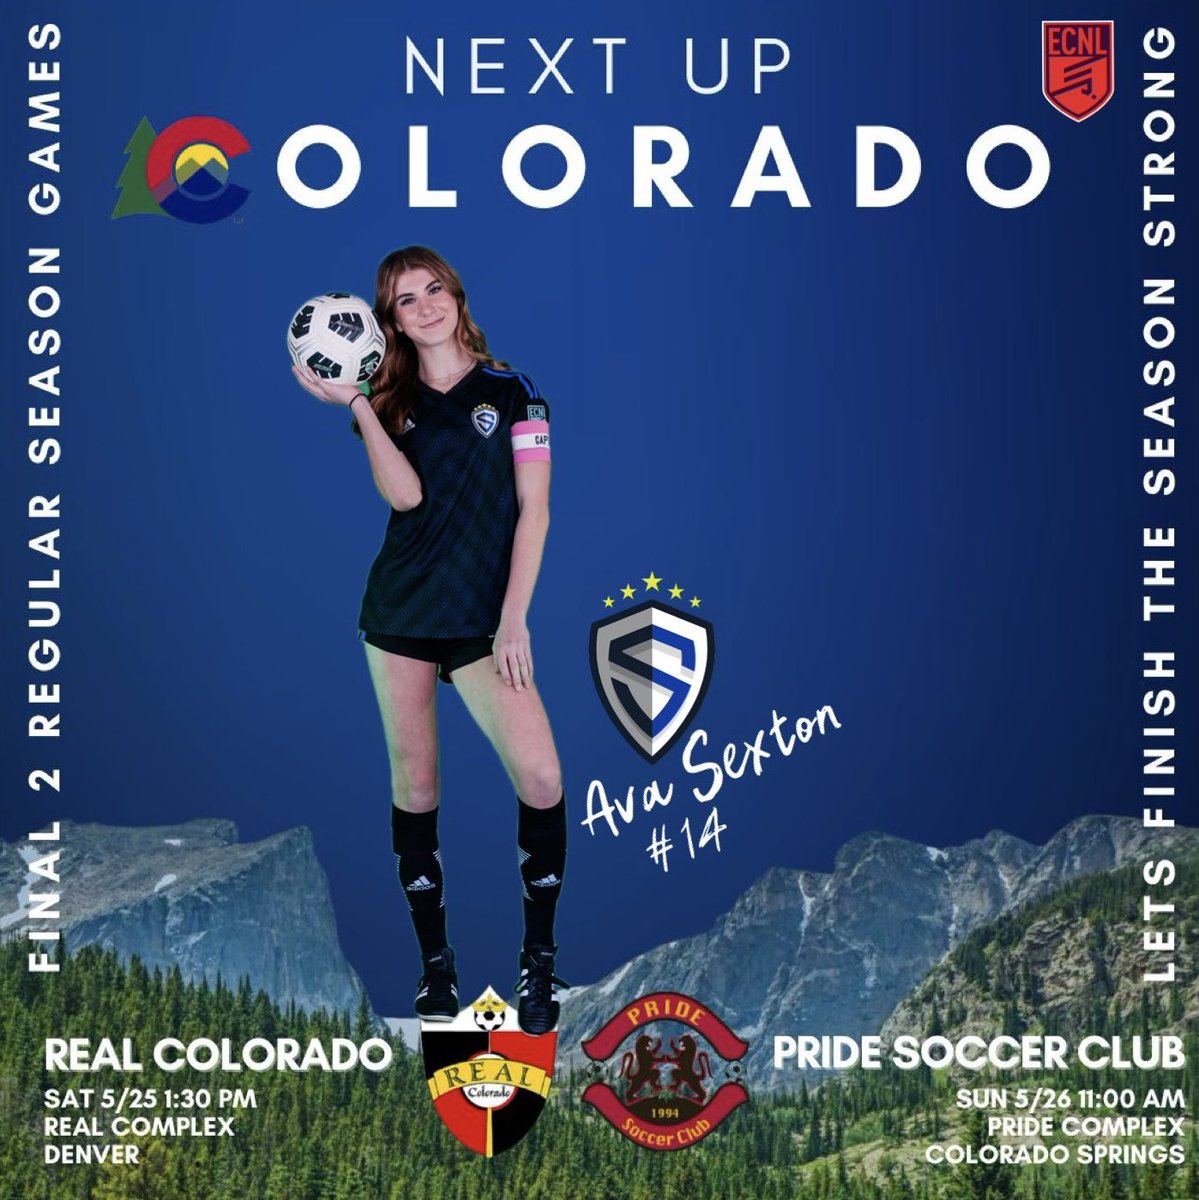 ✈️ Traveling to ℂ𝕠𝕝𝕠𝕣𝕒𝕕𝕠 this weekend for our last 2️⃣ league games… #finishstrong #Leadersplayhere #ecnl 
@ECNLgirls @NcsaSoccer @TopDrawerSoccer @PrepSoccer @PrepSoccerTX @TheSoccerWire @50_50Pod @TopPreps @GMsportsmedia1